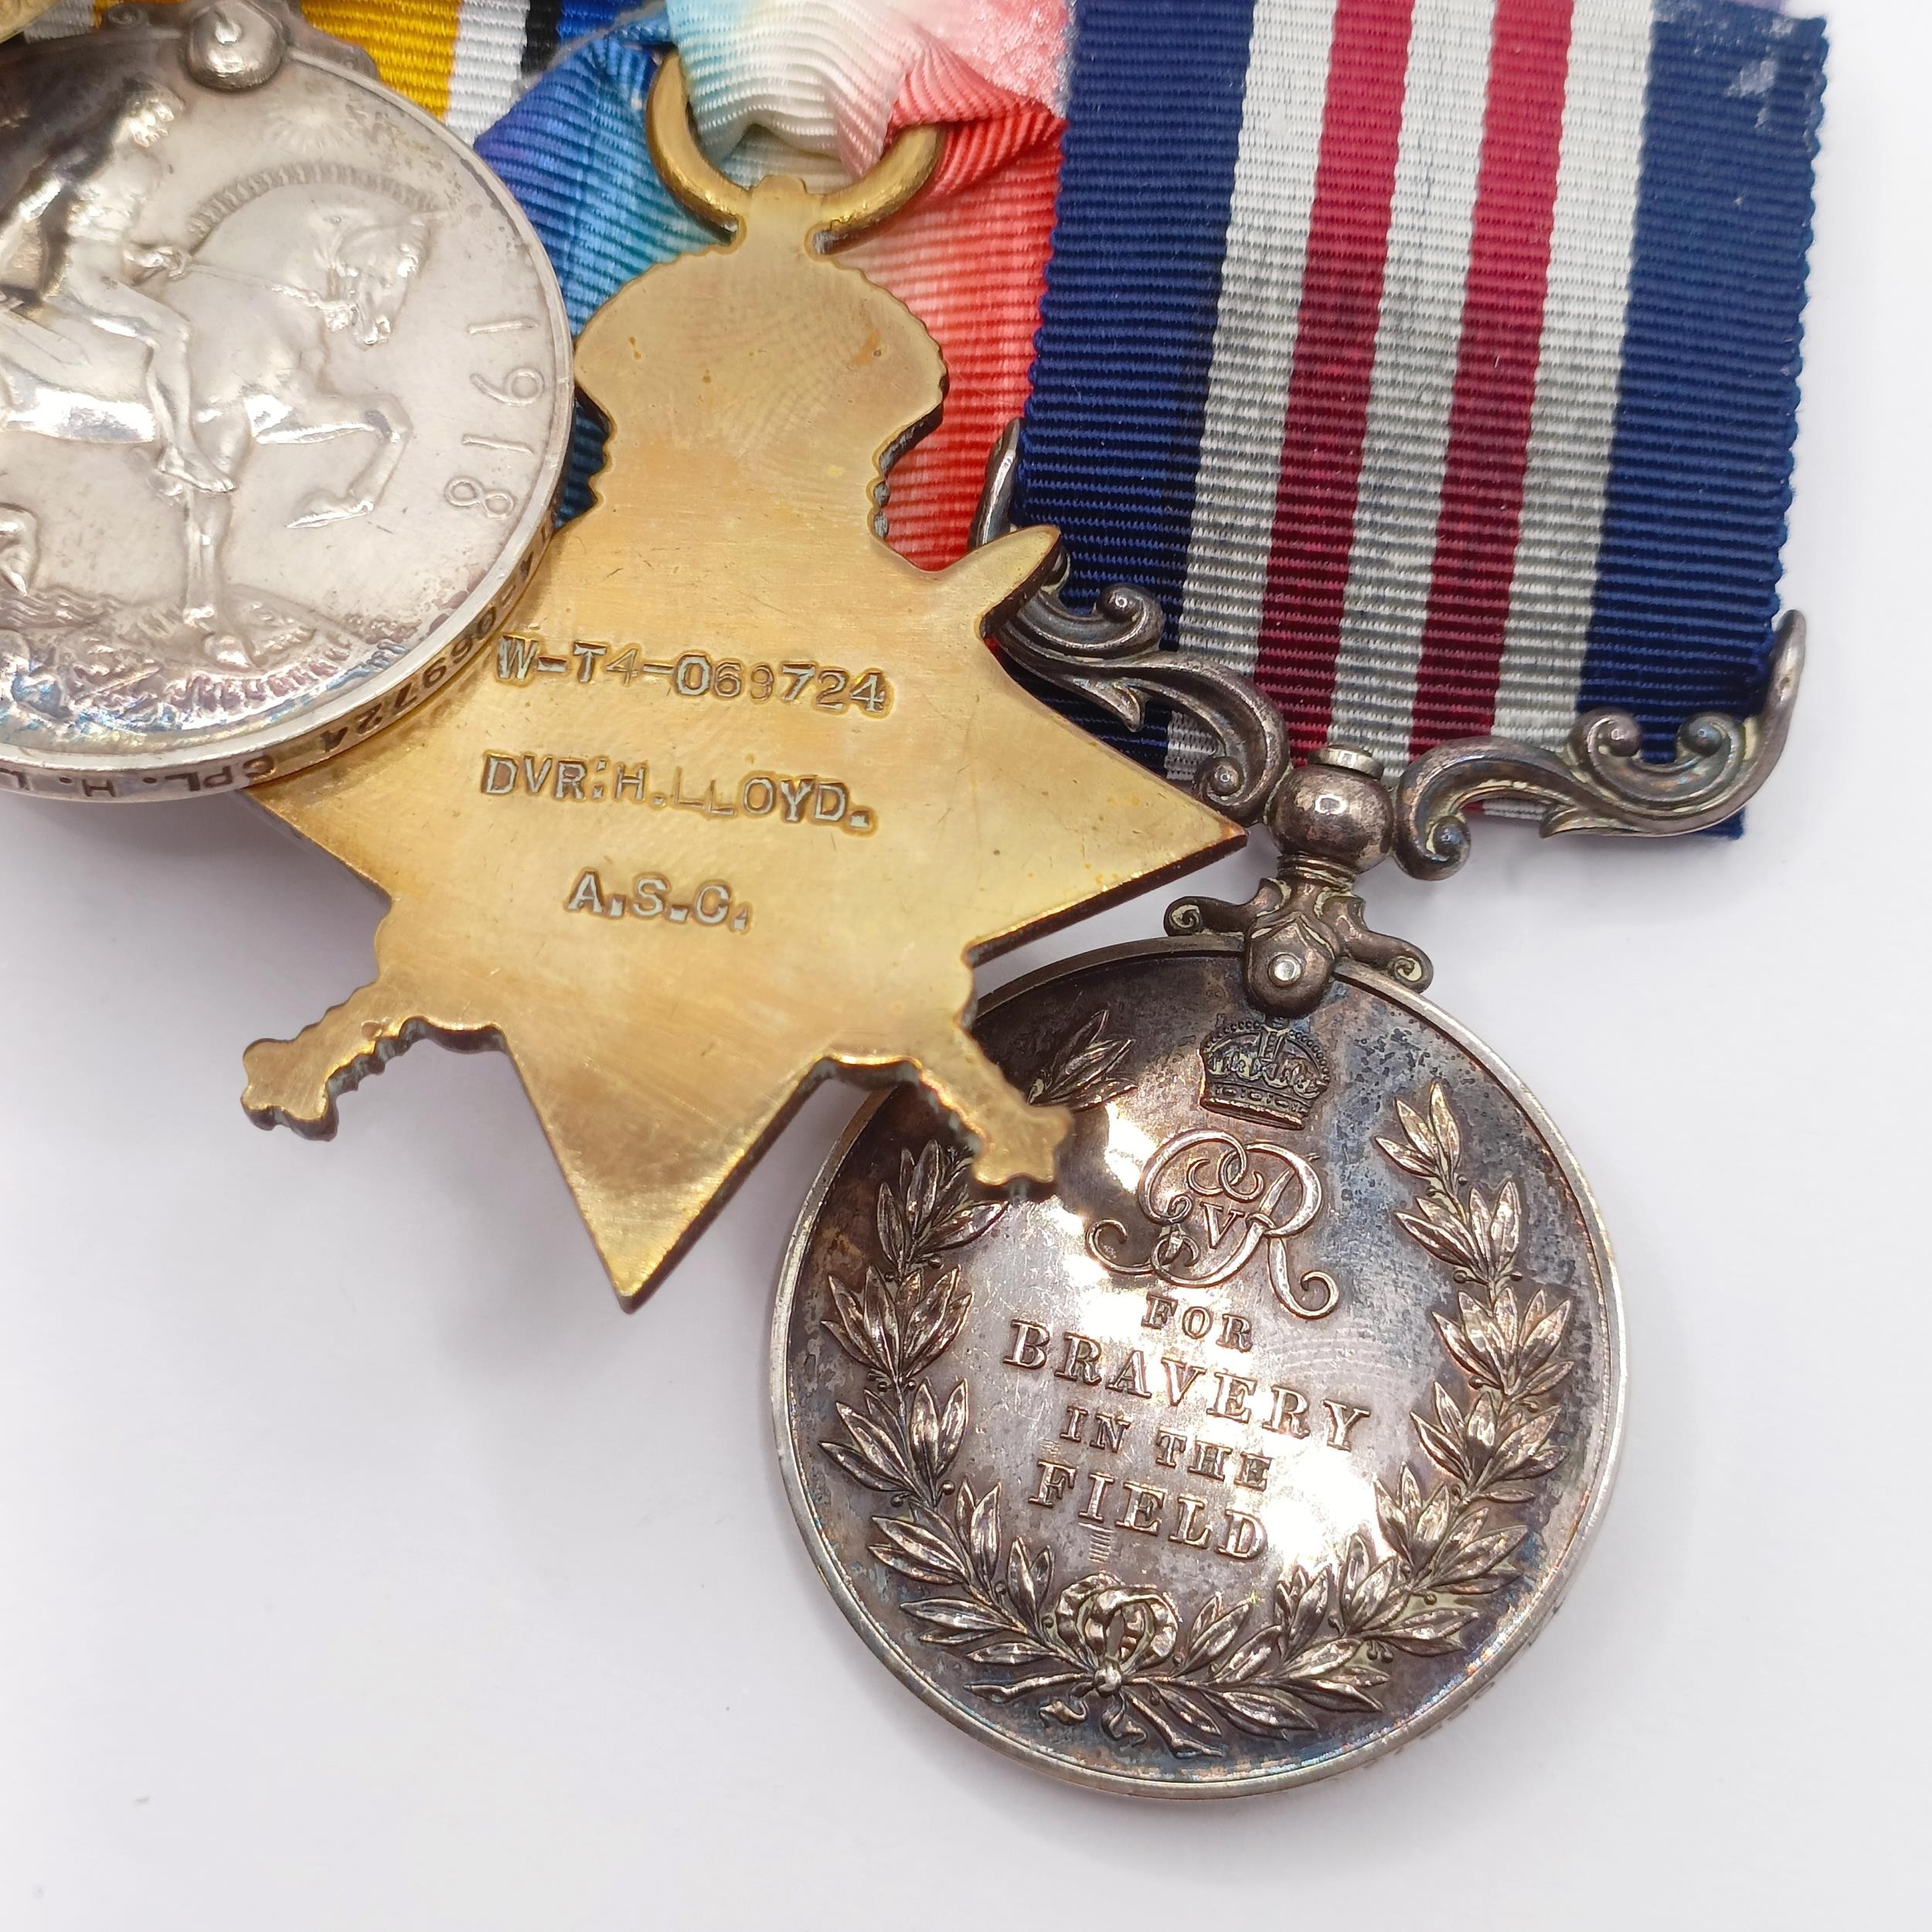 A group of four medals, awarded to T4-069724 Cpl H Lloyd, 332/Coy ASC, and a 1914-15 Star Trio - Image 8 of 9